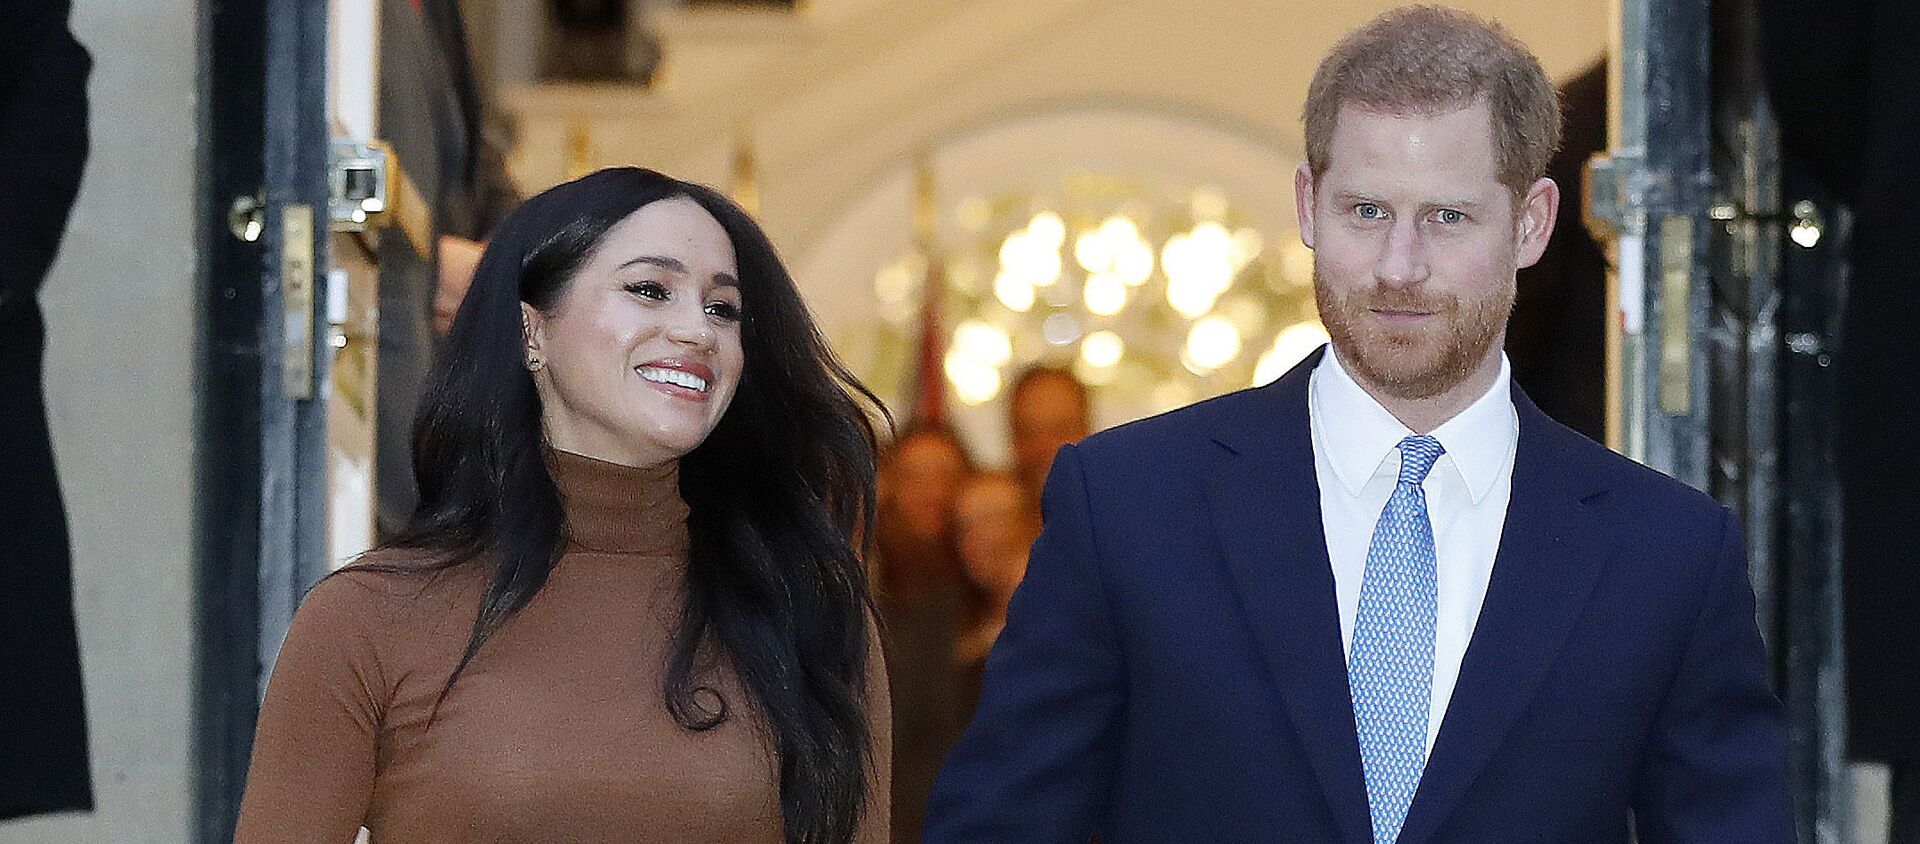 Britain's Prince Harry and Meghan, Duchess of Sussex leave after visiting Canada House in London, Tuesday Jan. 7, 2020, after their recent stay in Canada - Sputnik International, 1920, 07.02.2021